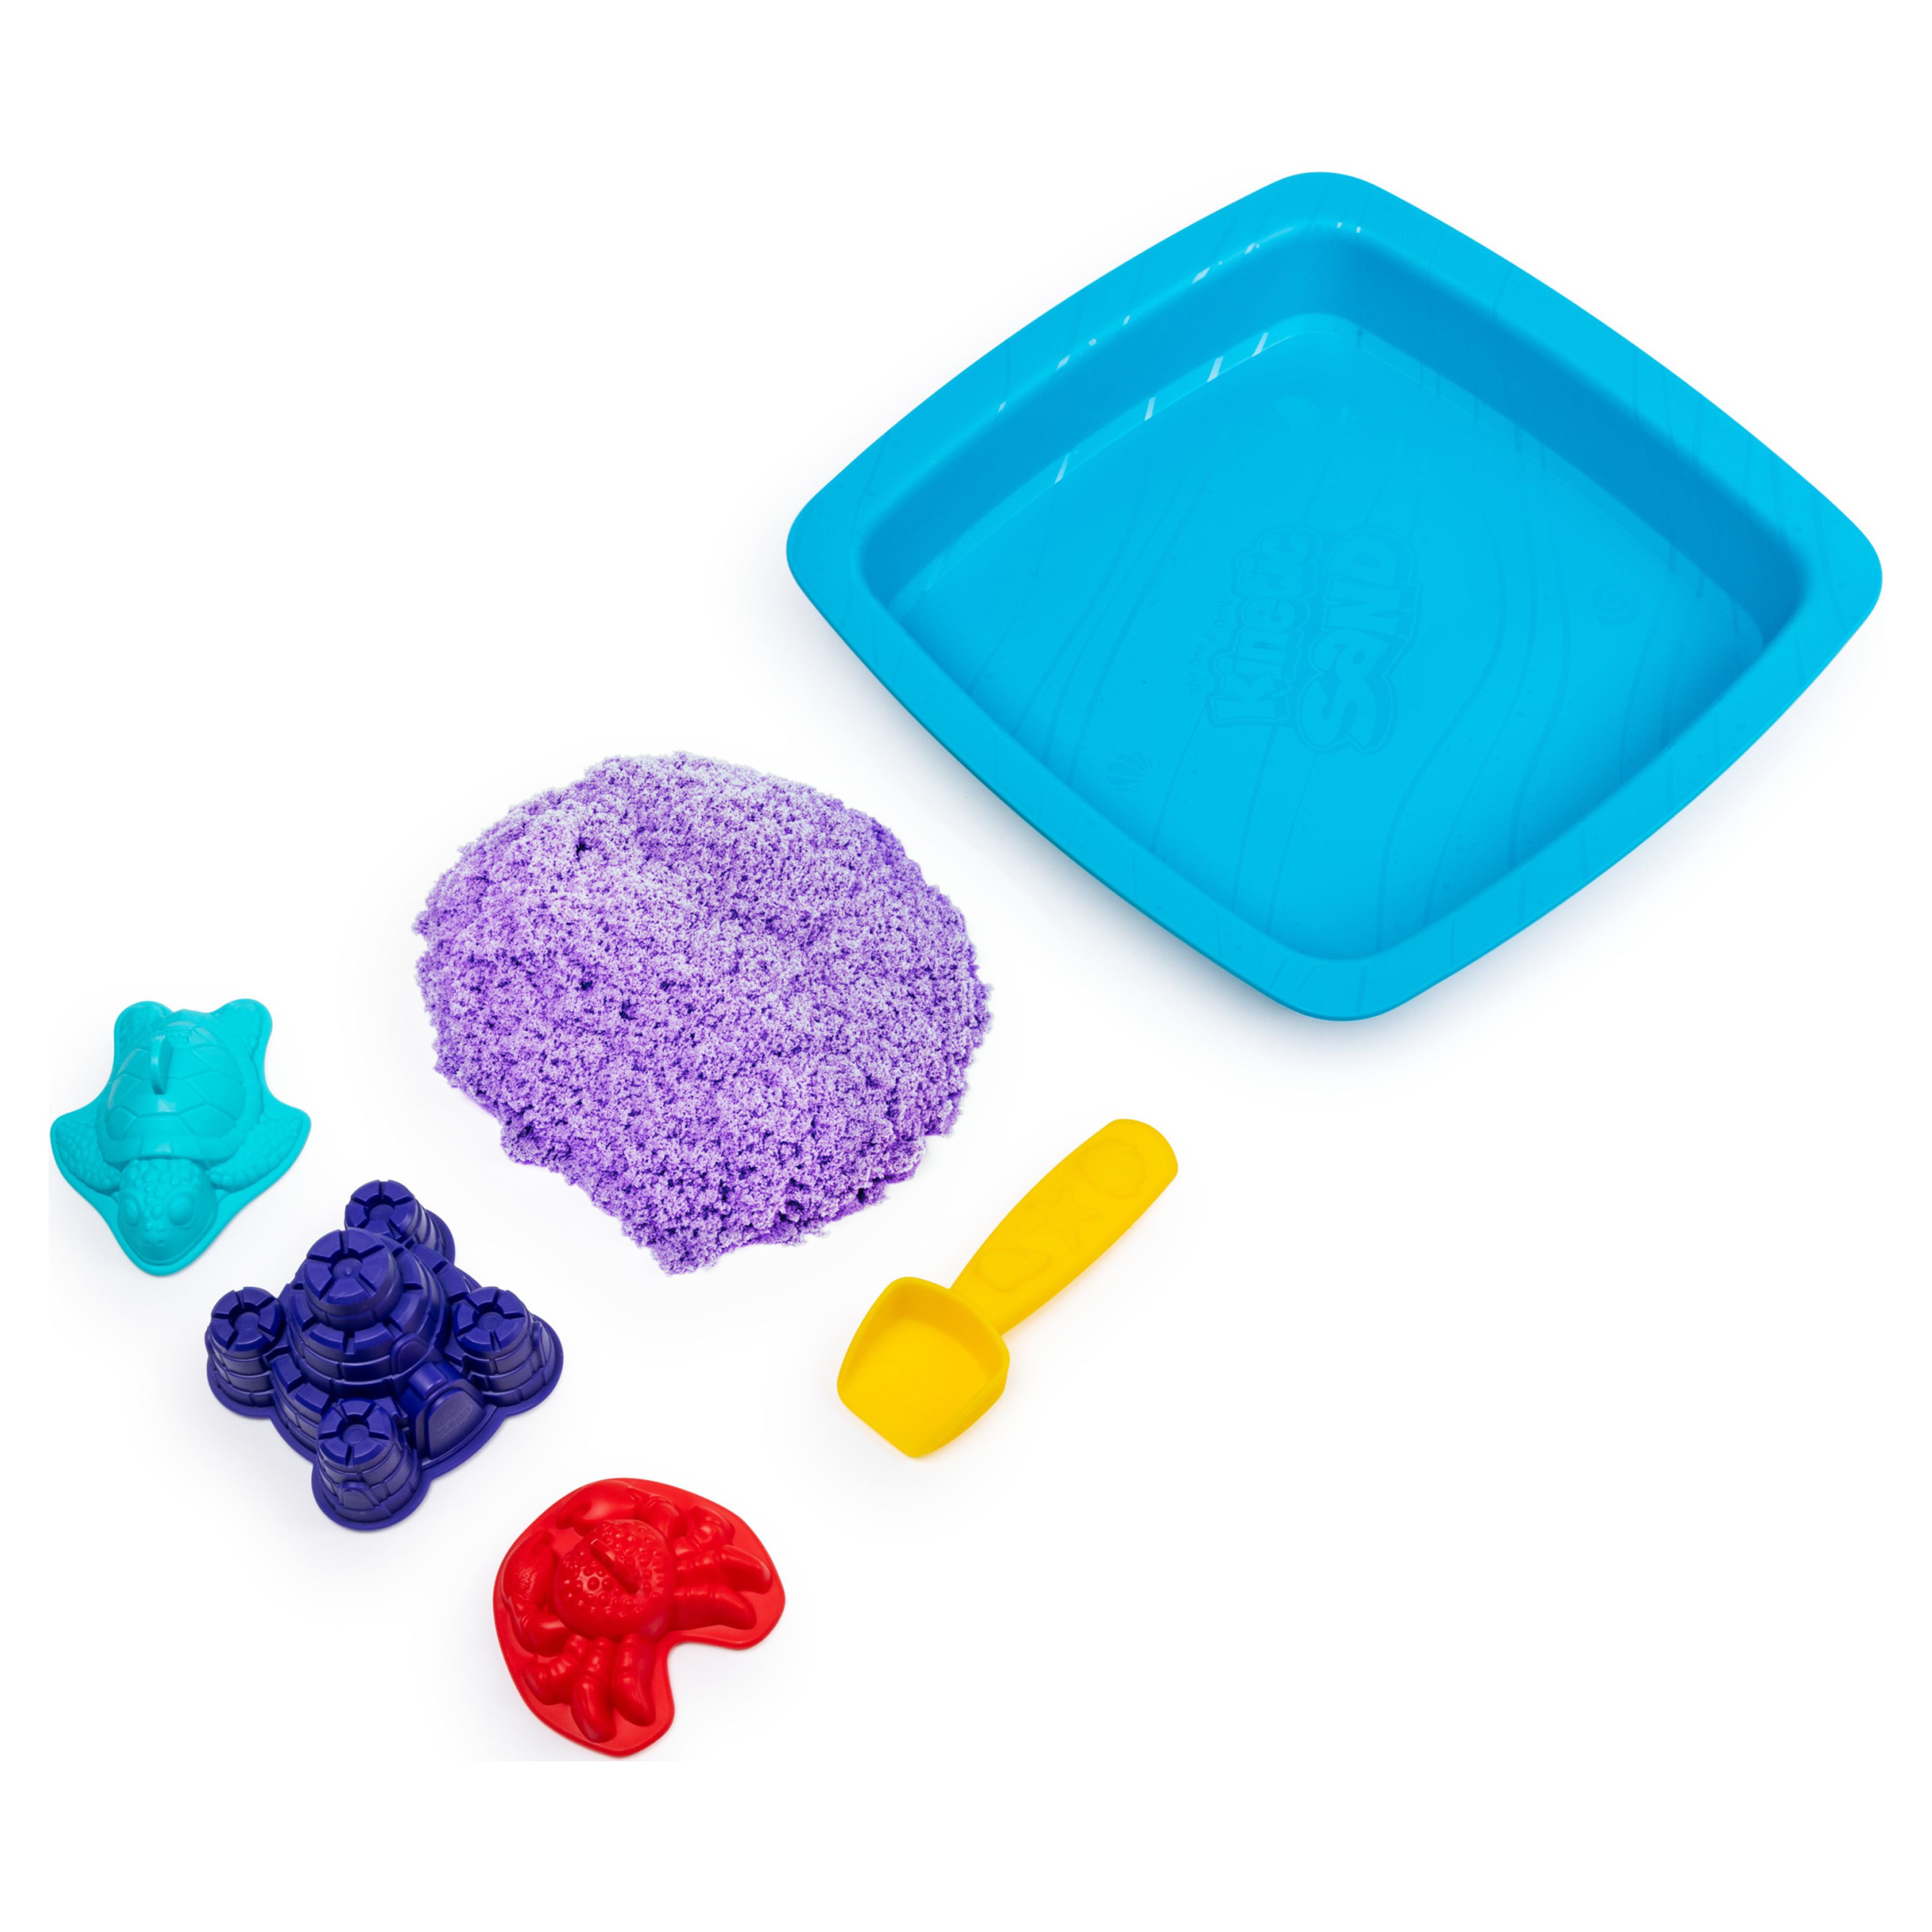 Kinetic Sand, Sandbox Playset with 1lb of Purple Kinetic Sand and 3 Molds, for Ages 3 and up - image 3 of 8